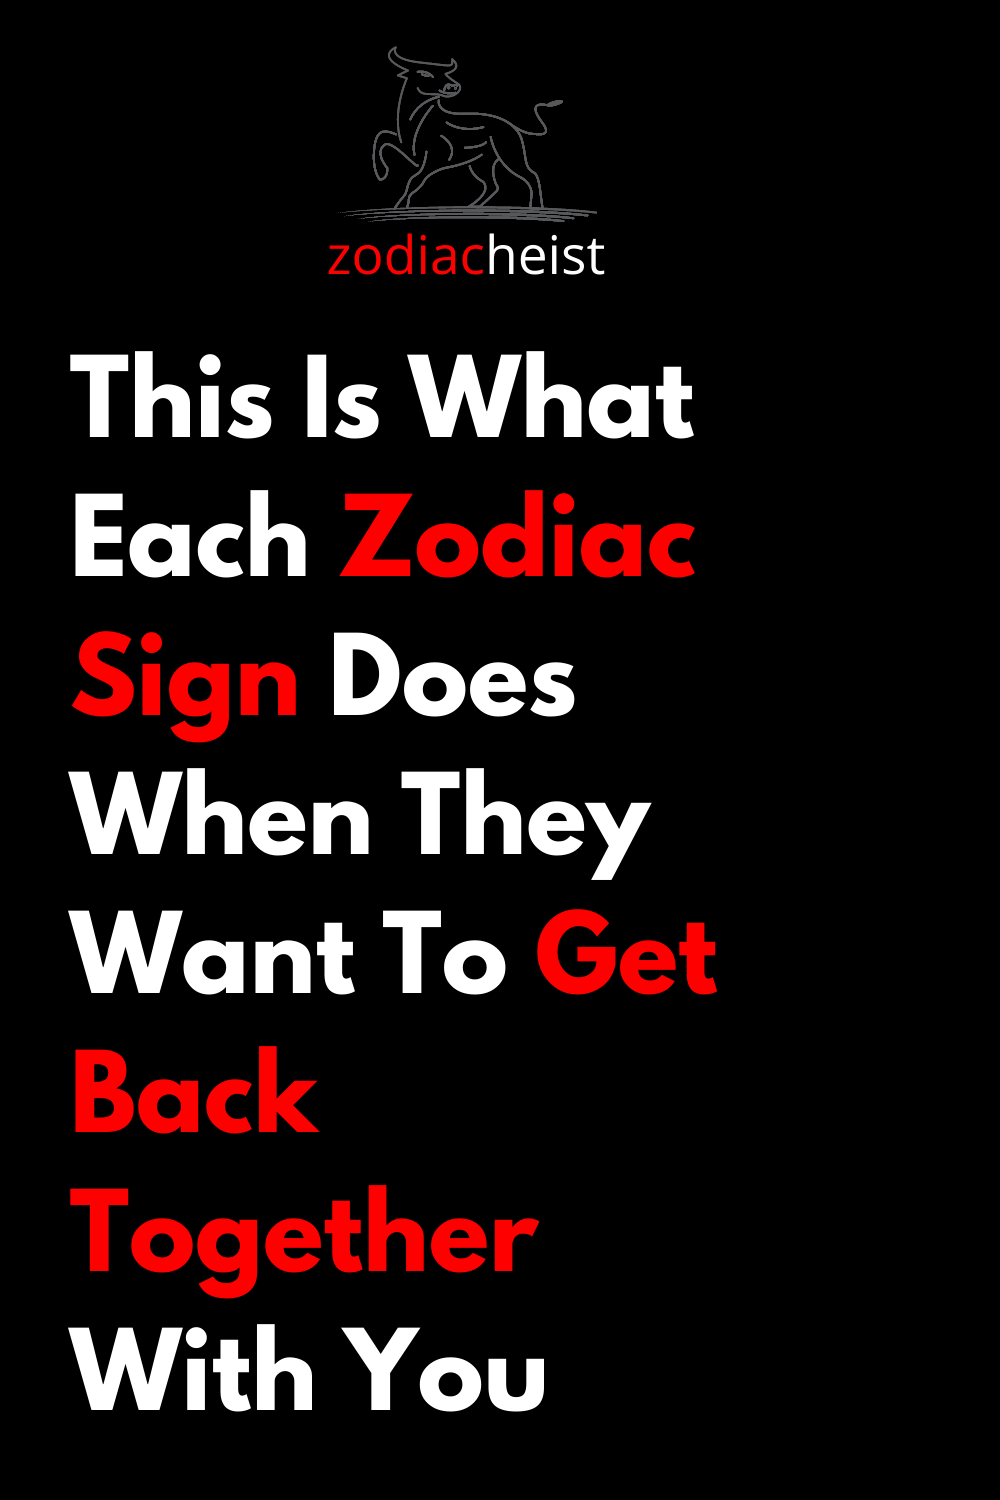 This Is What Each Zodiac Sign Does When They Want To Get Back Together With You